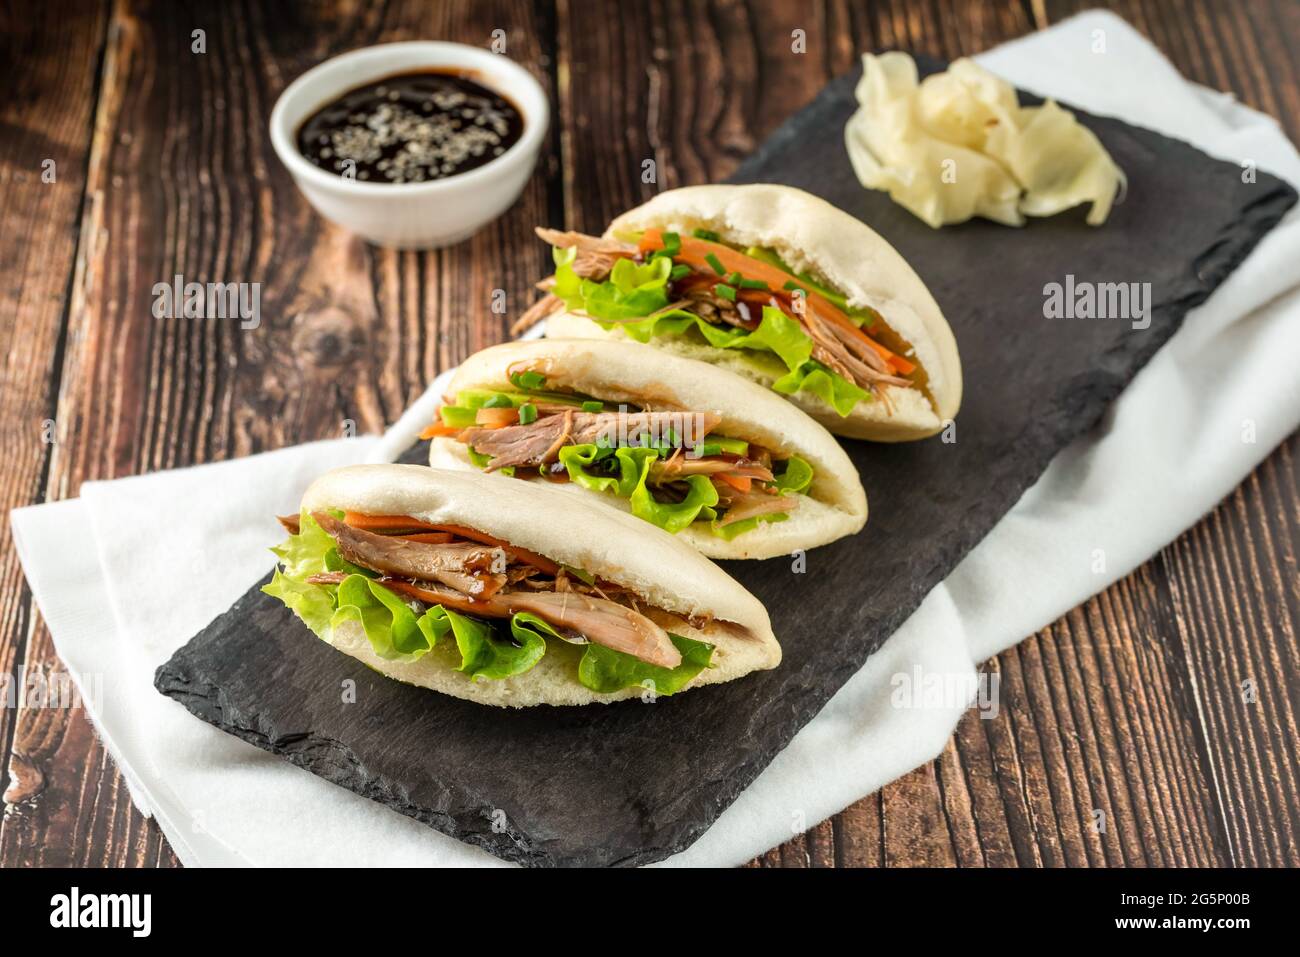 Gua bao, steamed buns with meat and vegetable. Asian cuisine Stock Photo